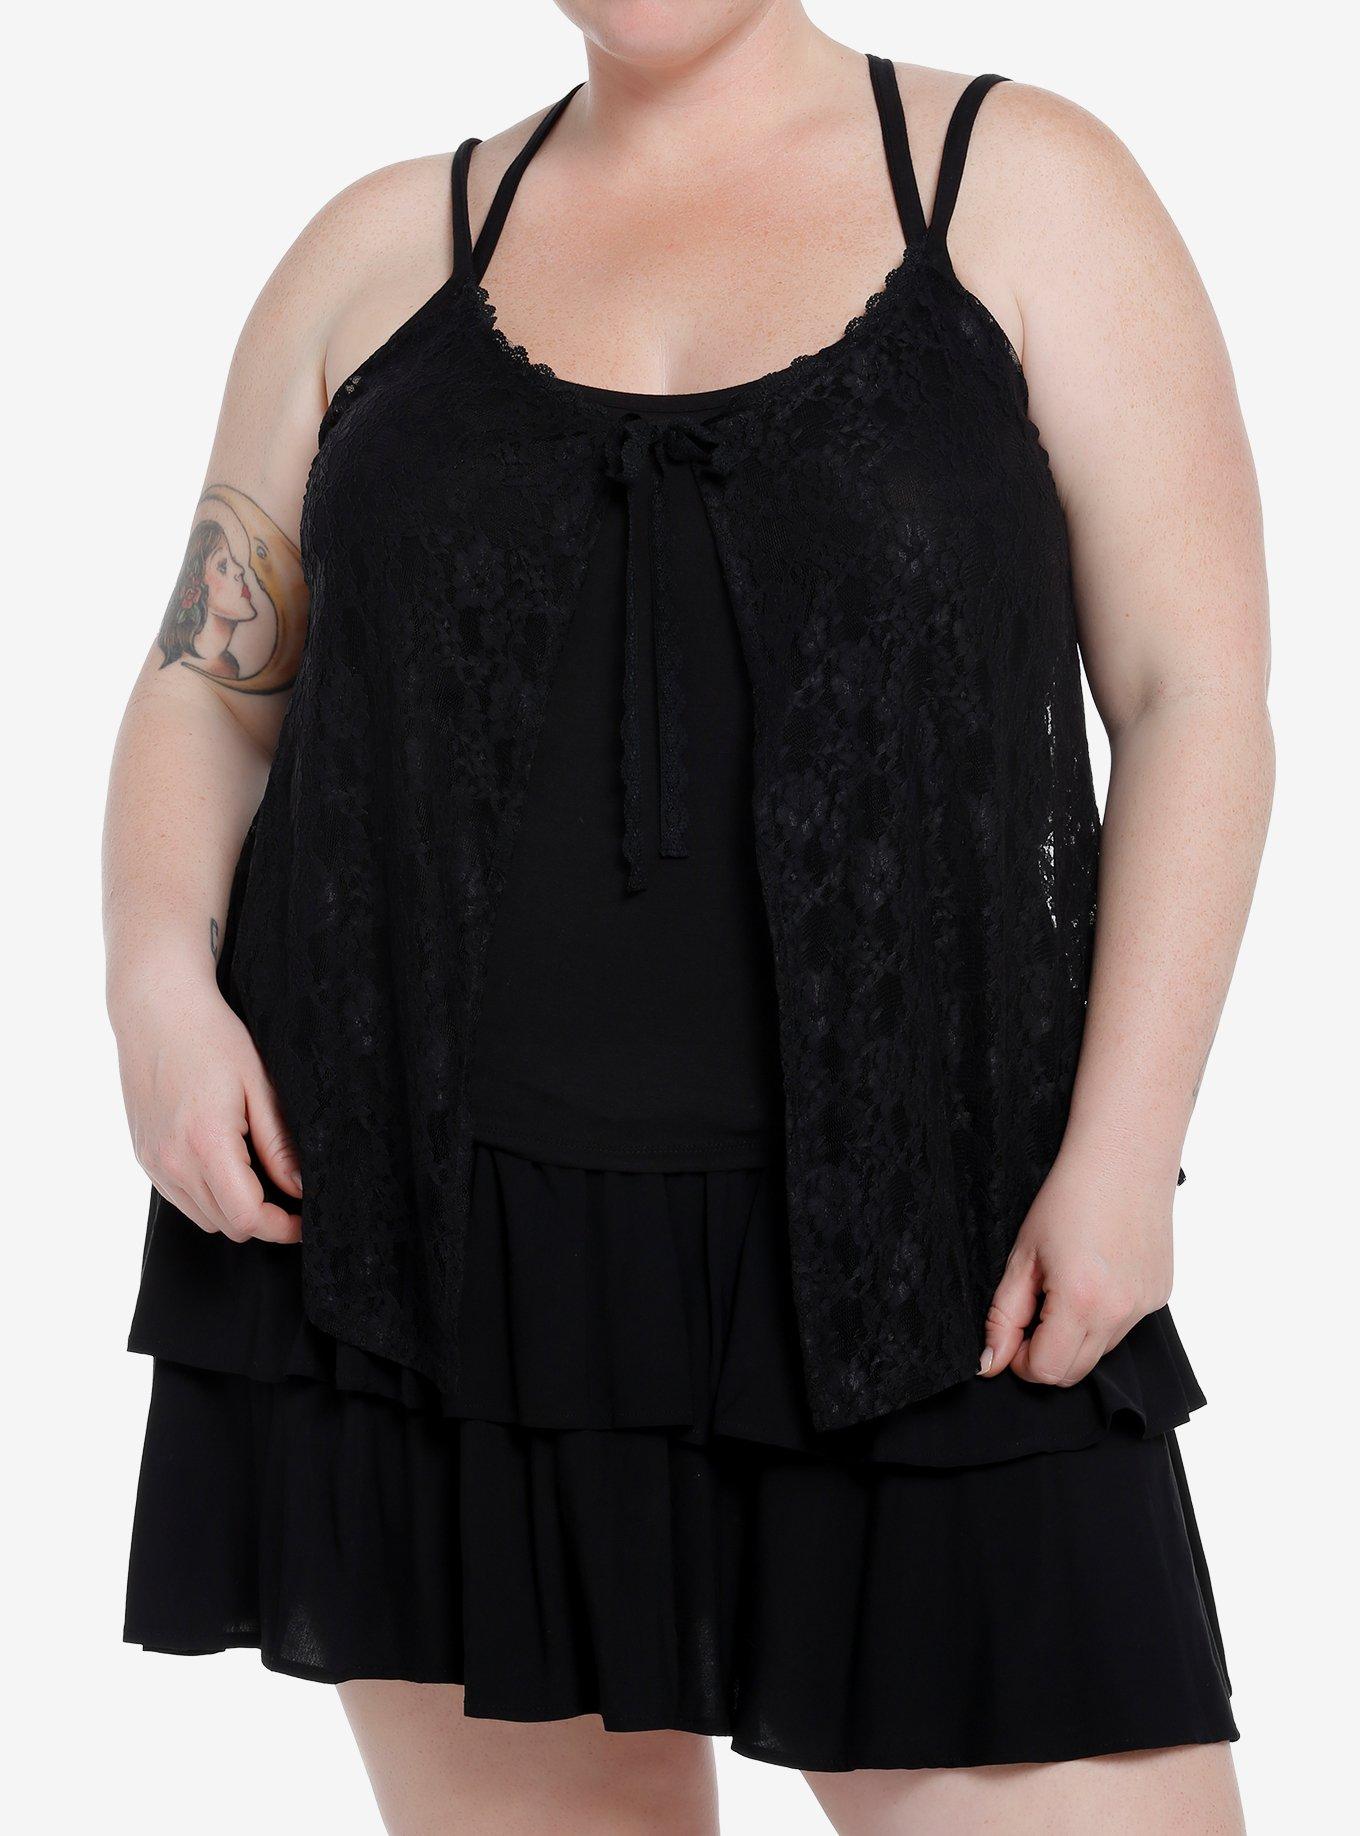 Cosmic Aura Strappy Tie-Front Lace Girls Cami Plus Size, BLACK, hi-res